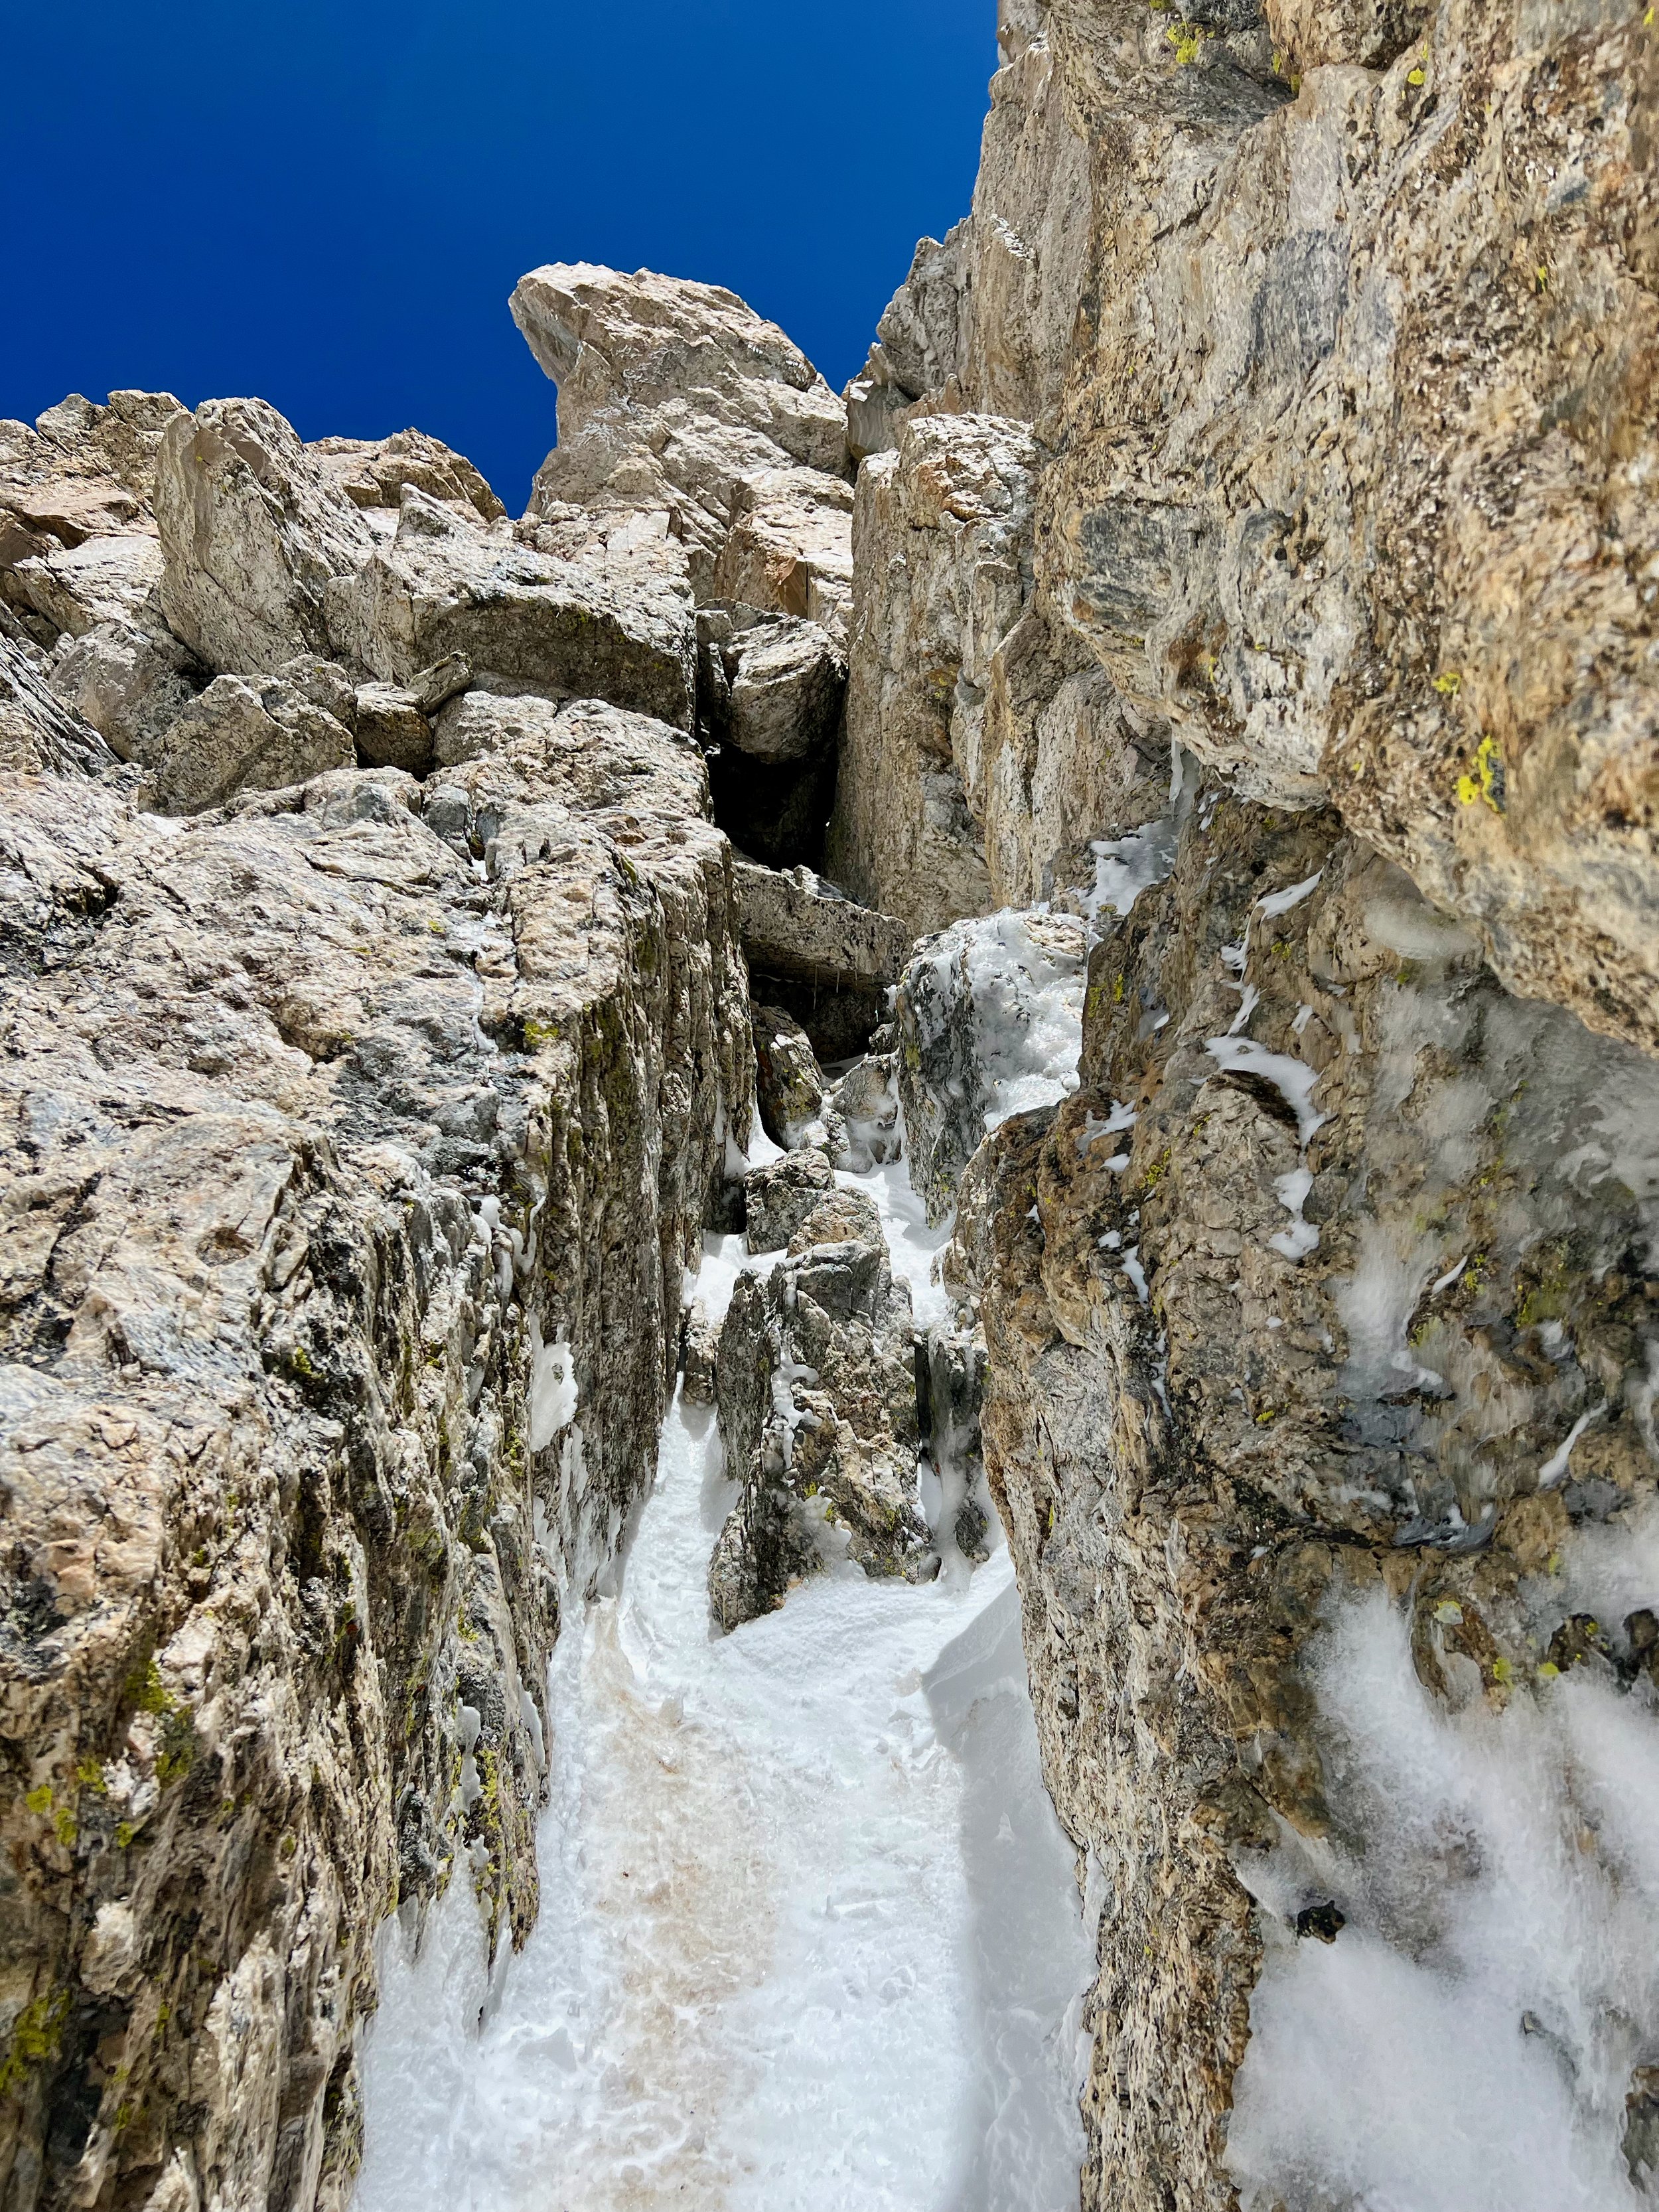 Looking up the Koven route